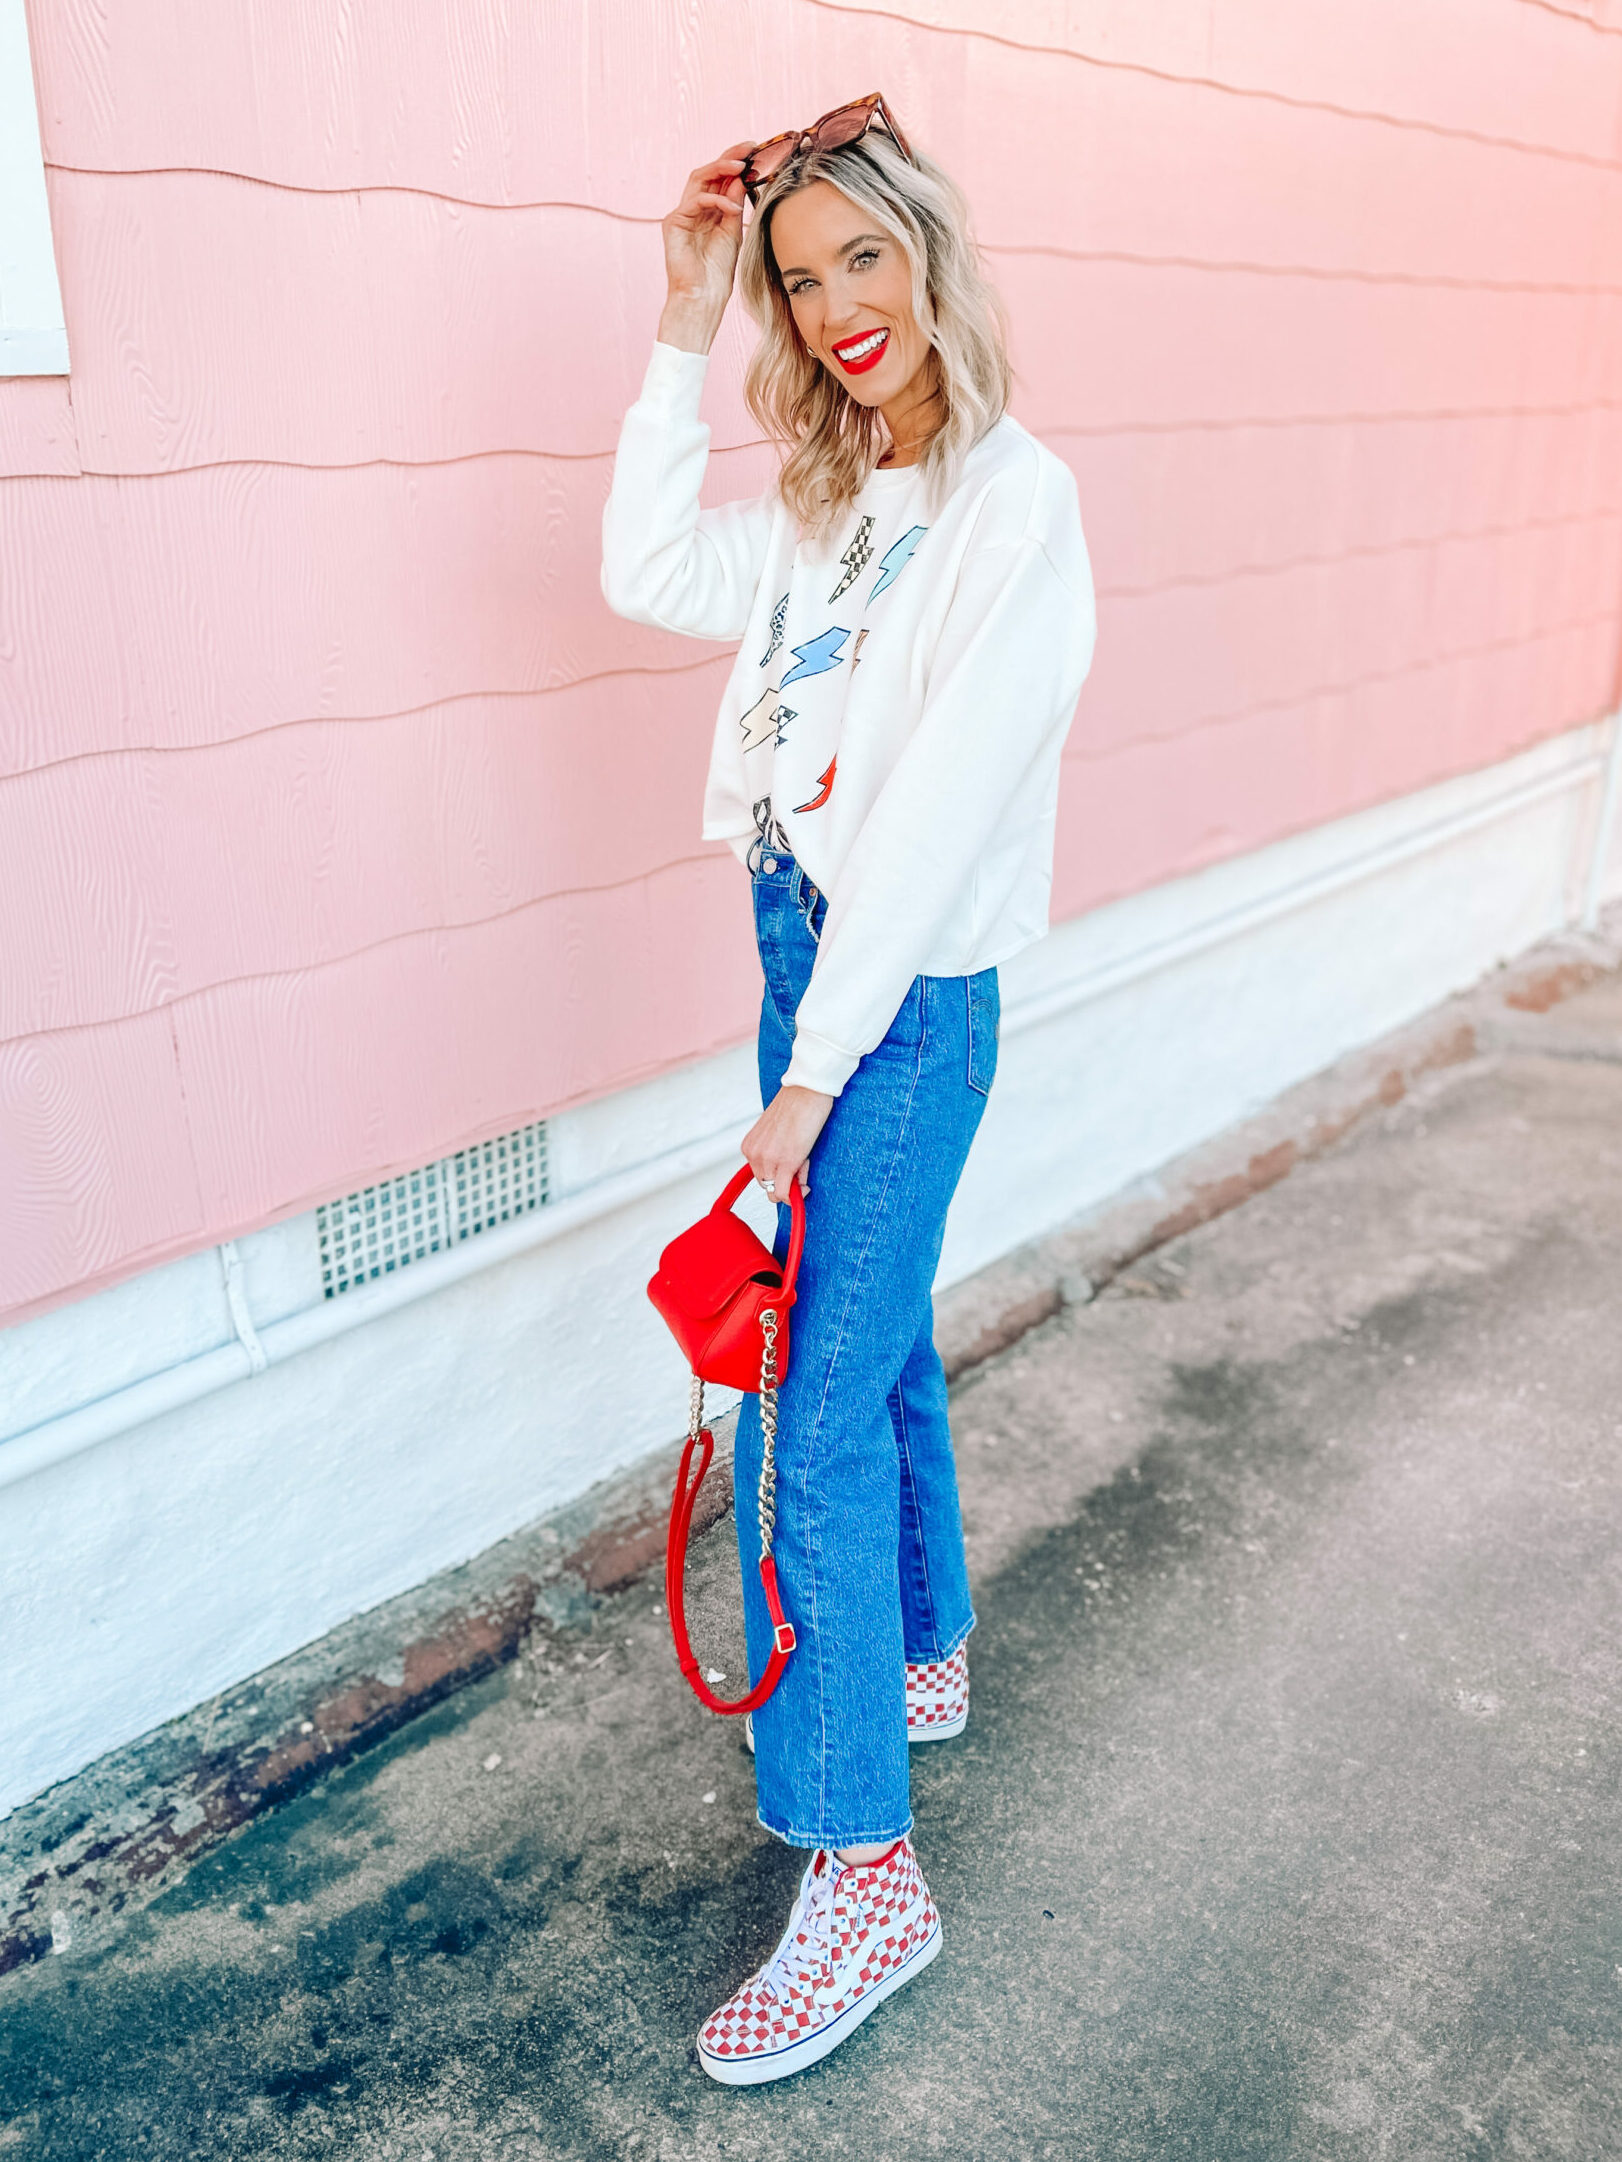 I'm sharing a Target try on haul with great, affordable, everyday basics you can wear so many ways! I love this AC/DC sweatshirt with my jeans and sneakers. 